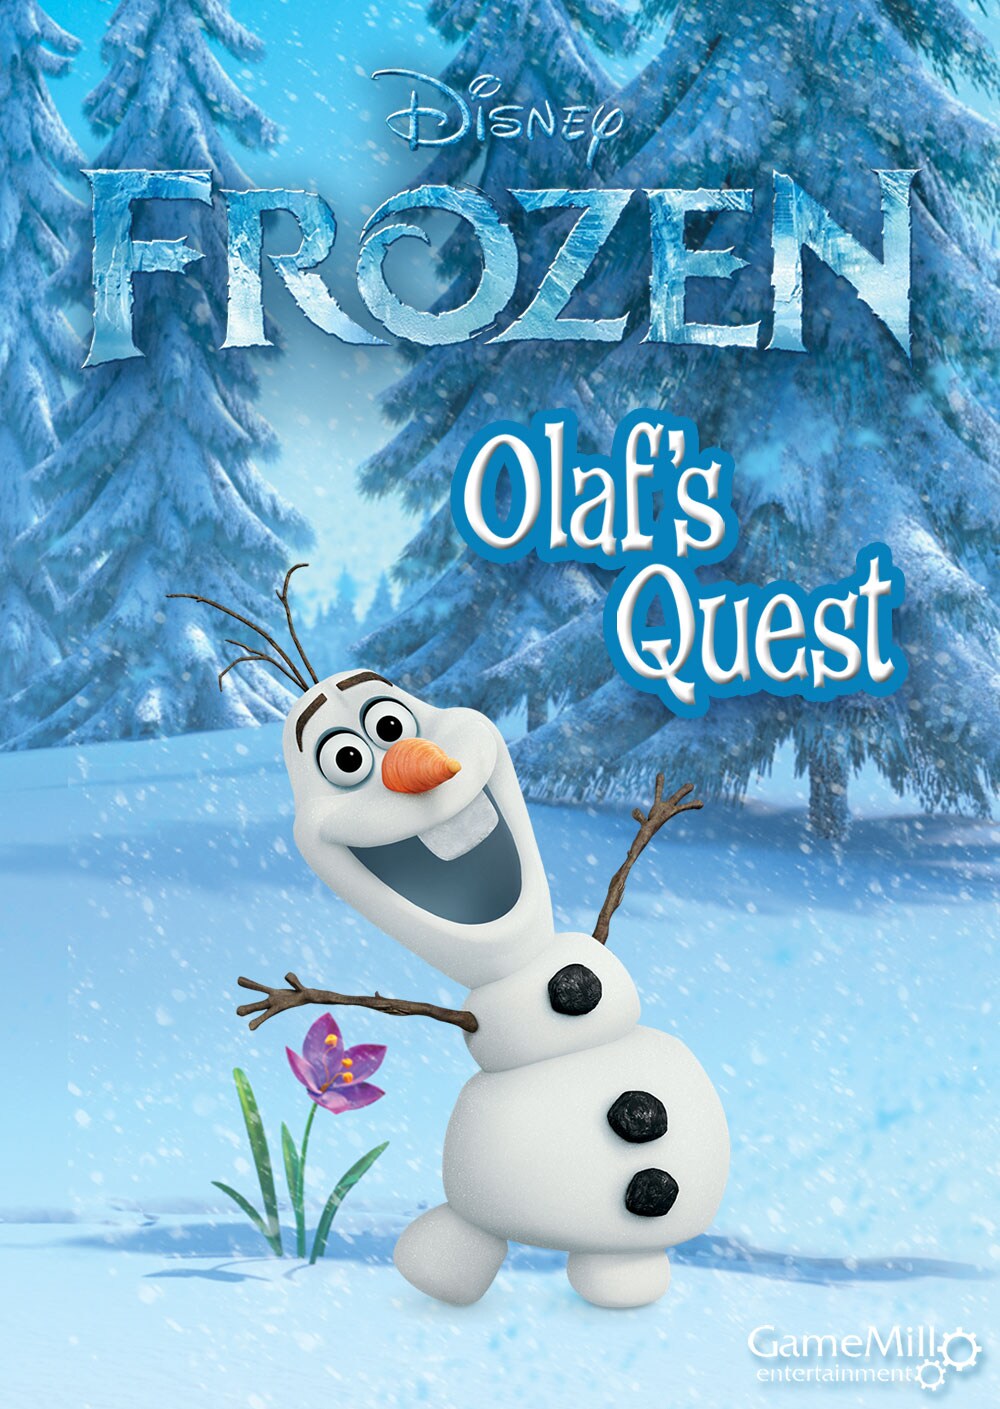 Frozen Official Disney Site For Elsa Anna And More